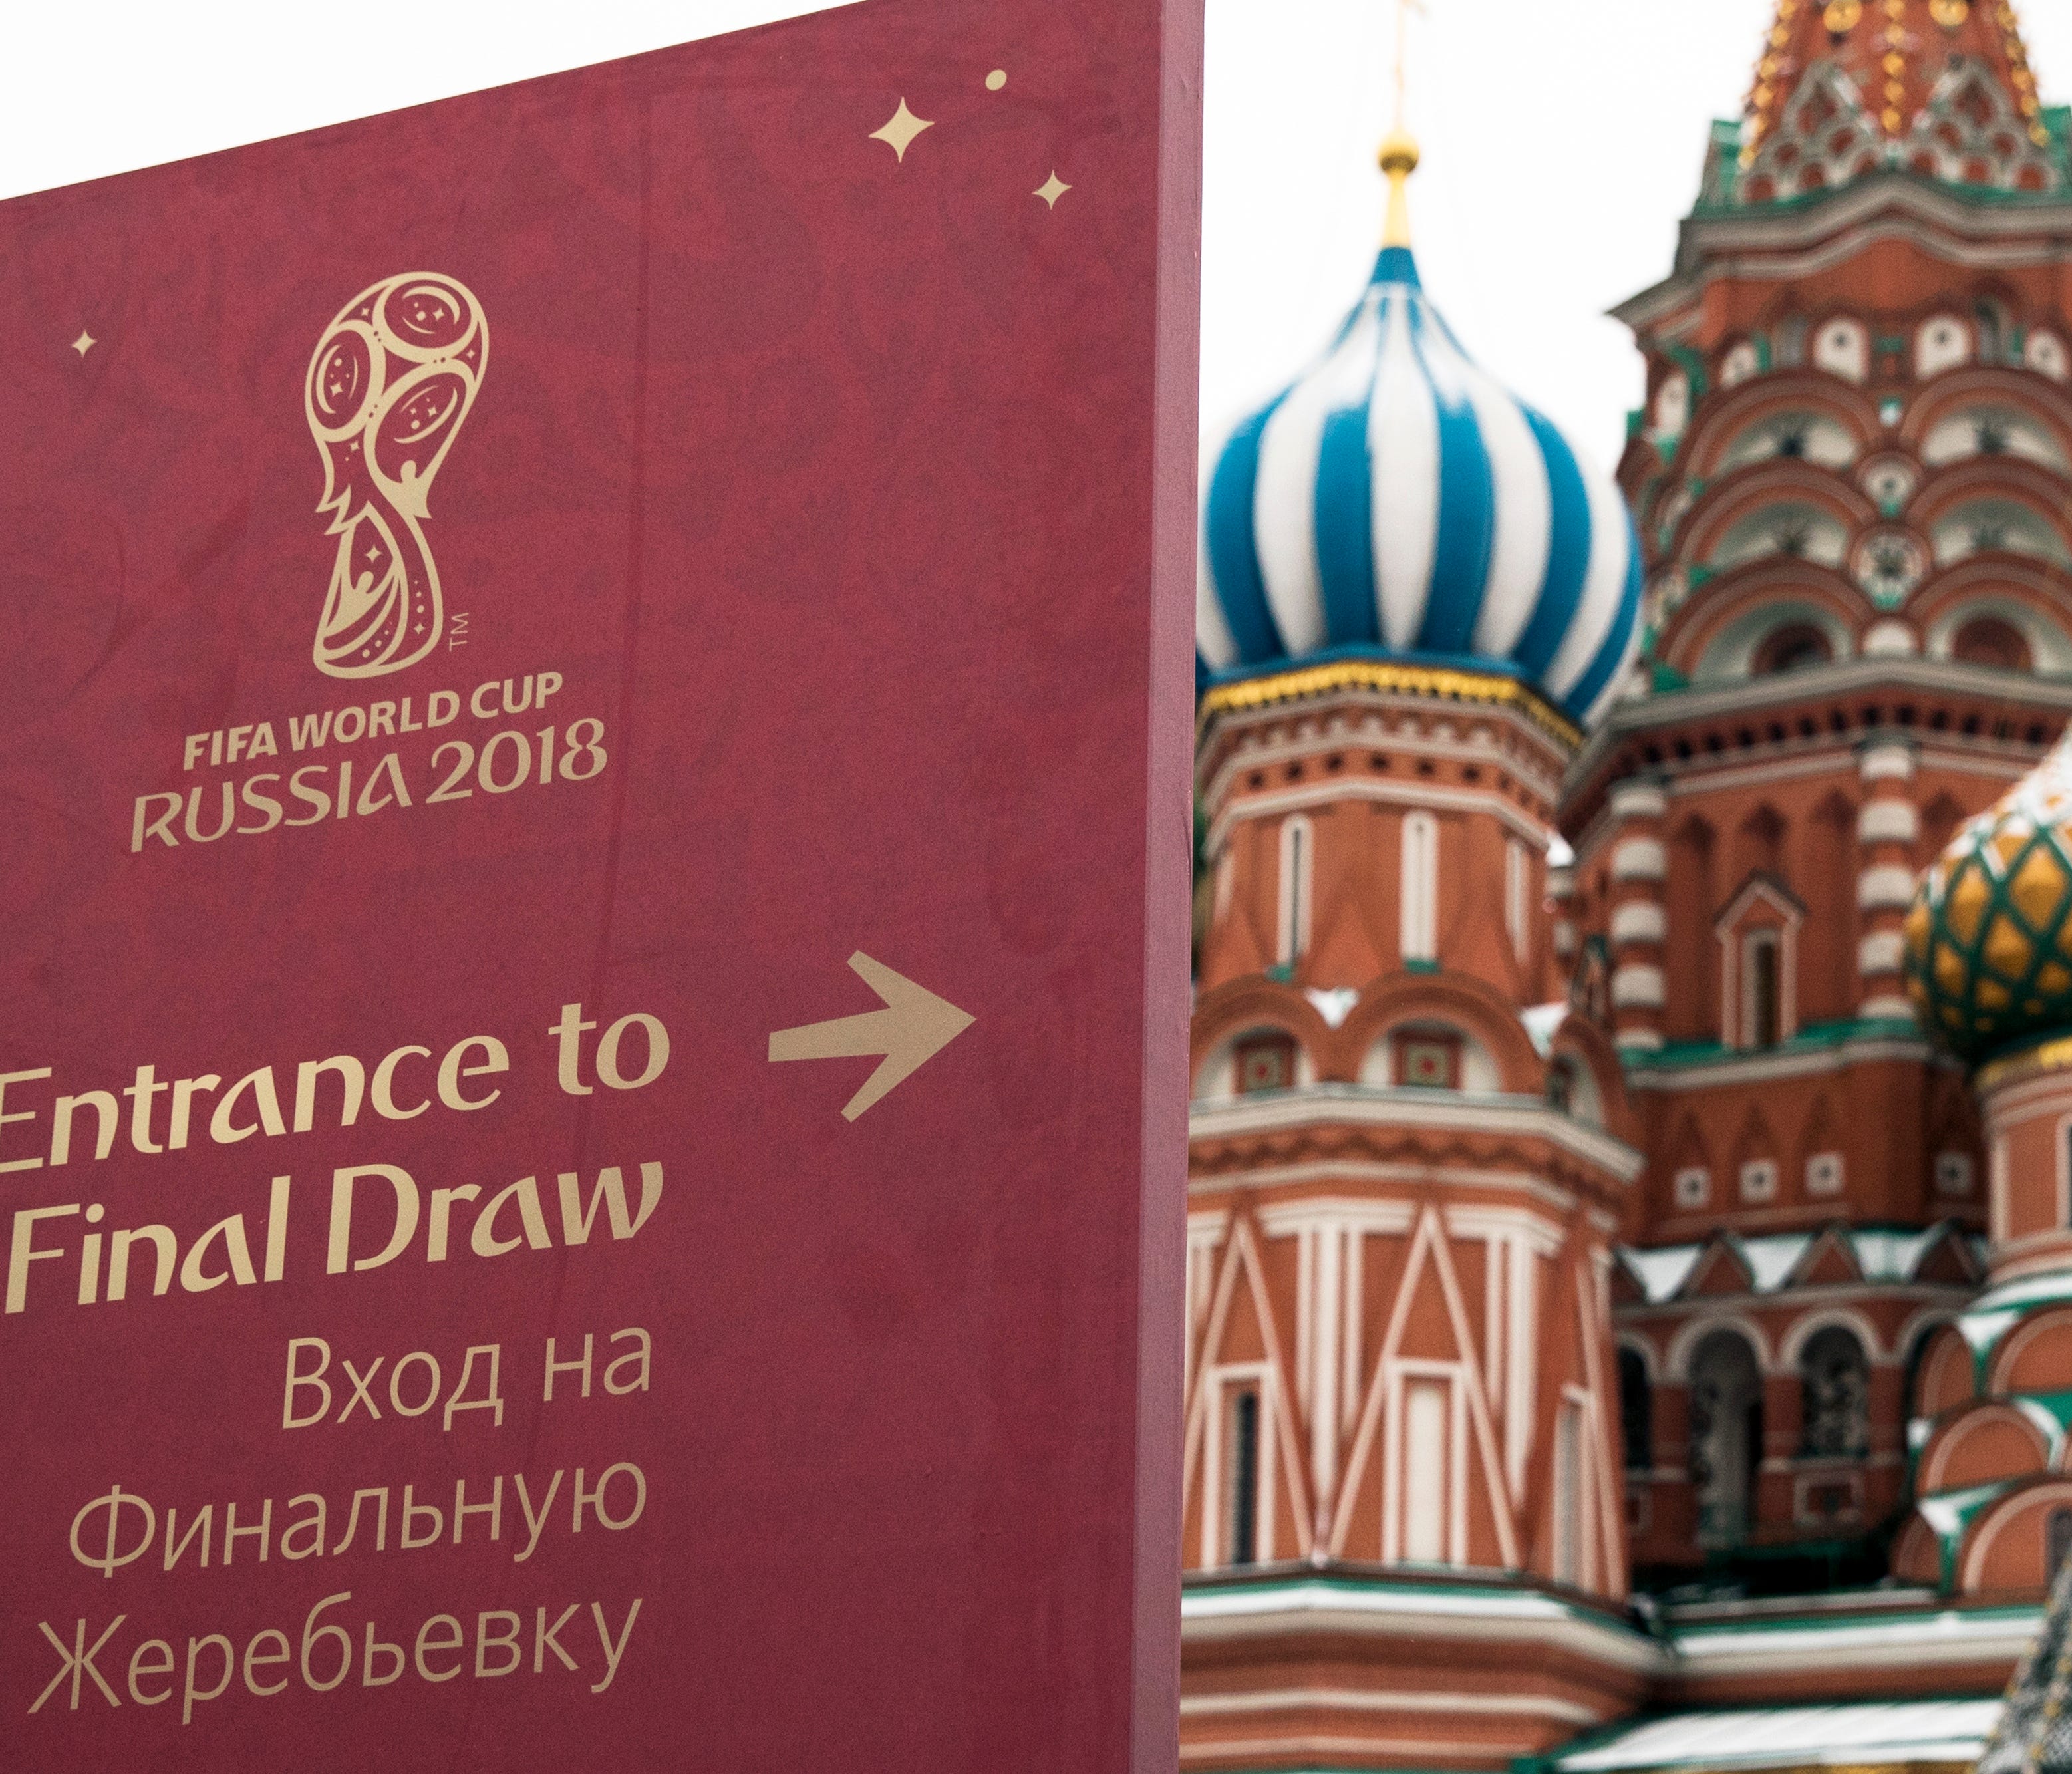 A signpost directing people to the entrance of the World Cup Final Draw is placed on the Red Square, with the St. Basil cathedral in the background, in Moscow, Russia, Thursday, Nov. 30, 2017. The Final Draw for the 2018 Fifa World Cup in Russia will